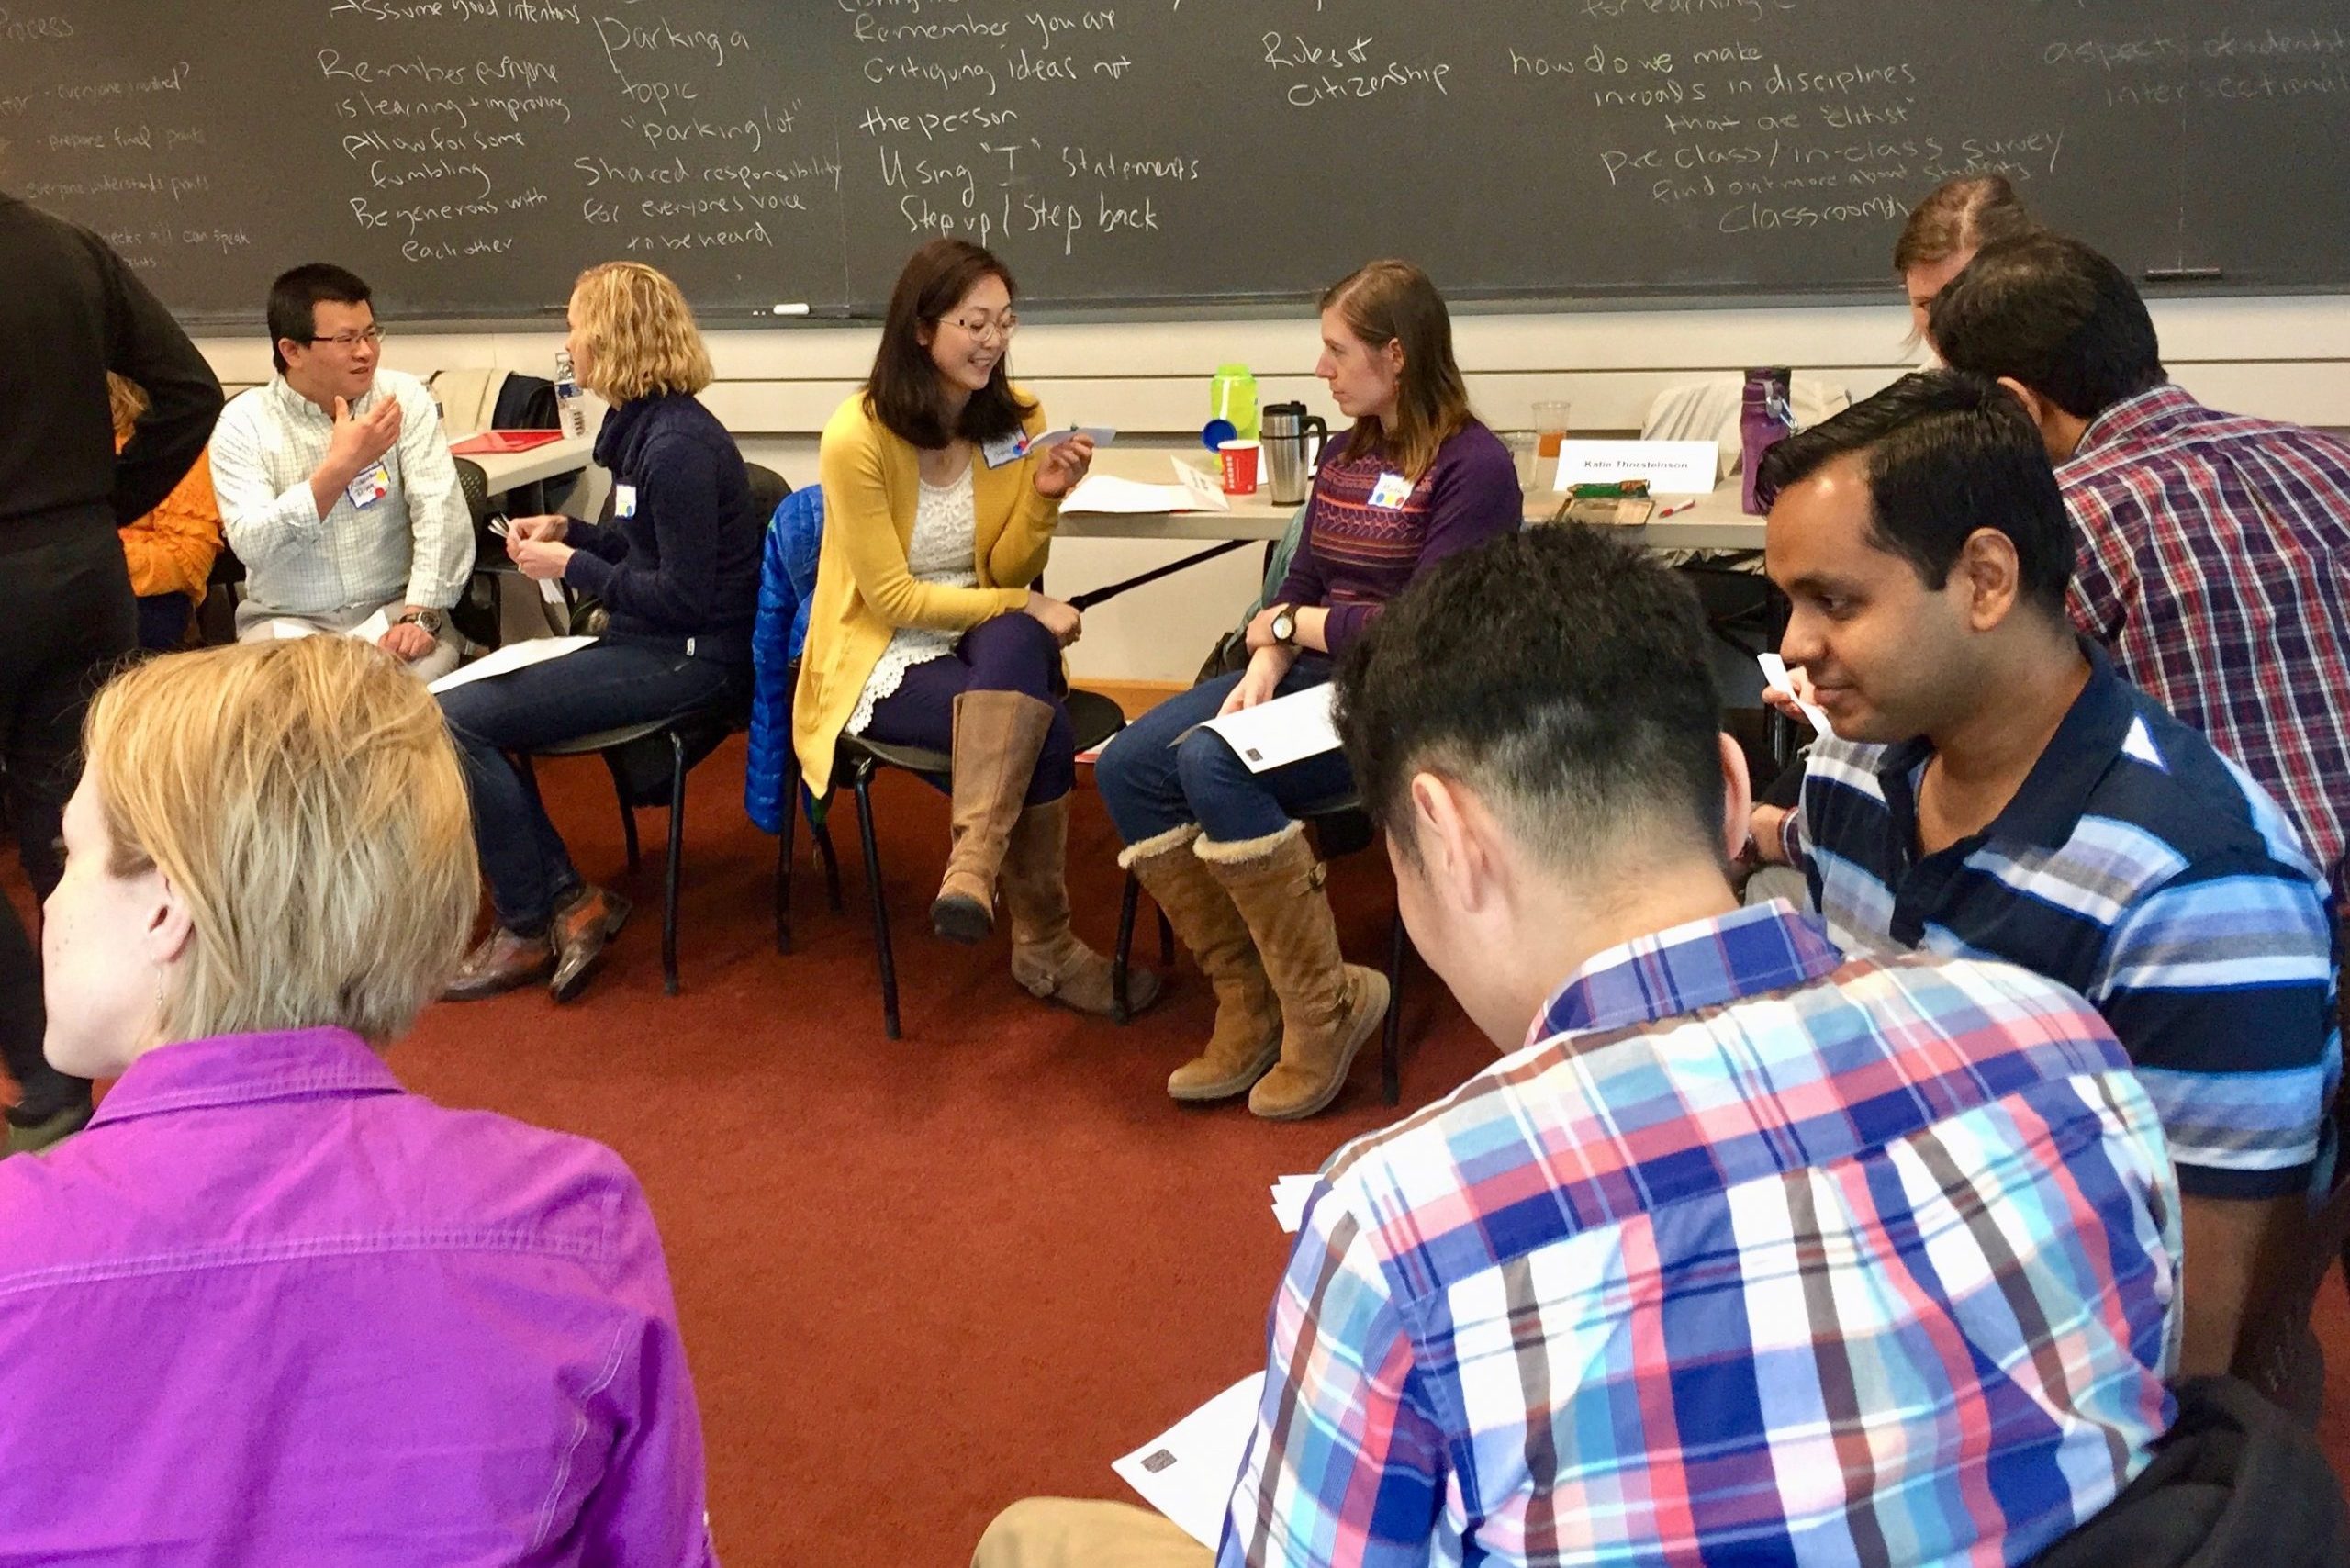 Graduate and postdoctoral participants in the Inclusive Teaching Institute 2018 practice intergroup dialogue skills